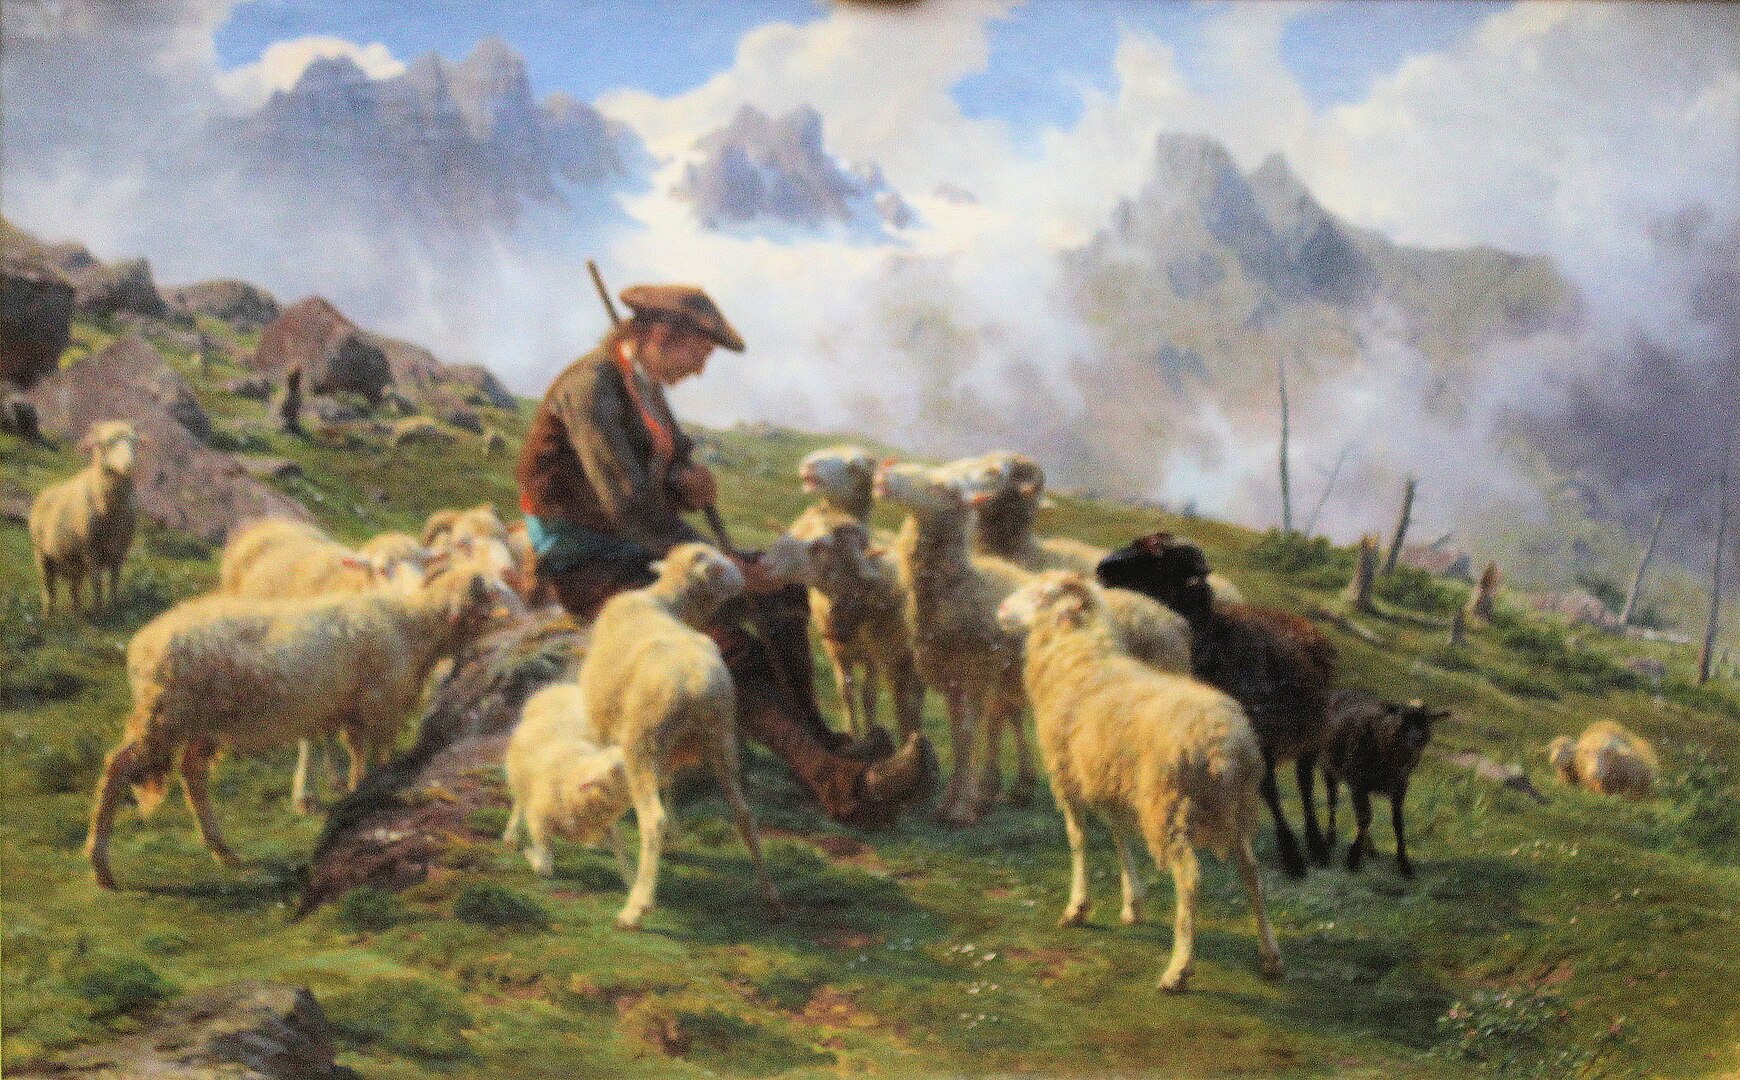 A woman is surrounded by a group of sheep as she rests, sitting on a grassy hillside.